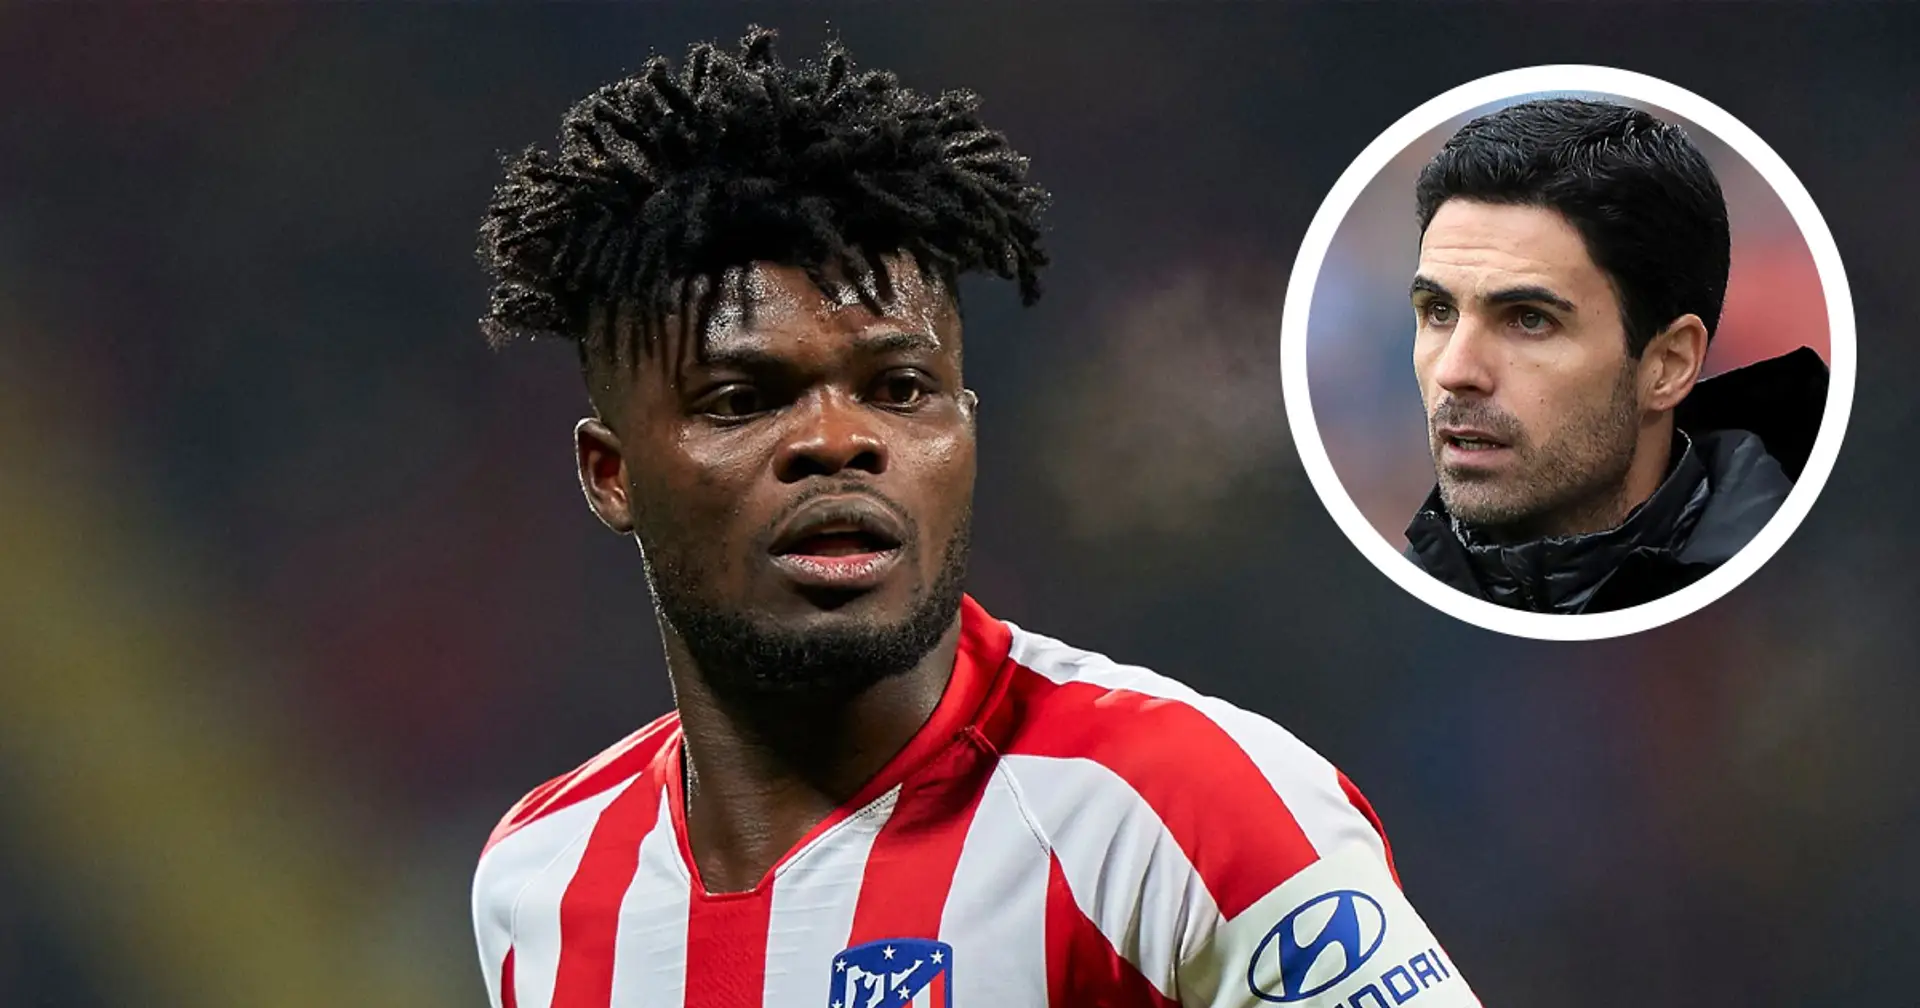 Why Mikel Arteta so persistent in chasing Partey: Thomas' tactical strengths analysed in X sentences